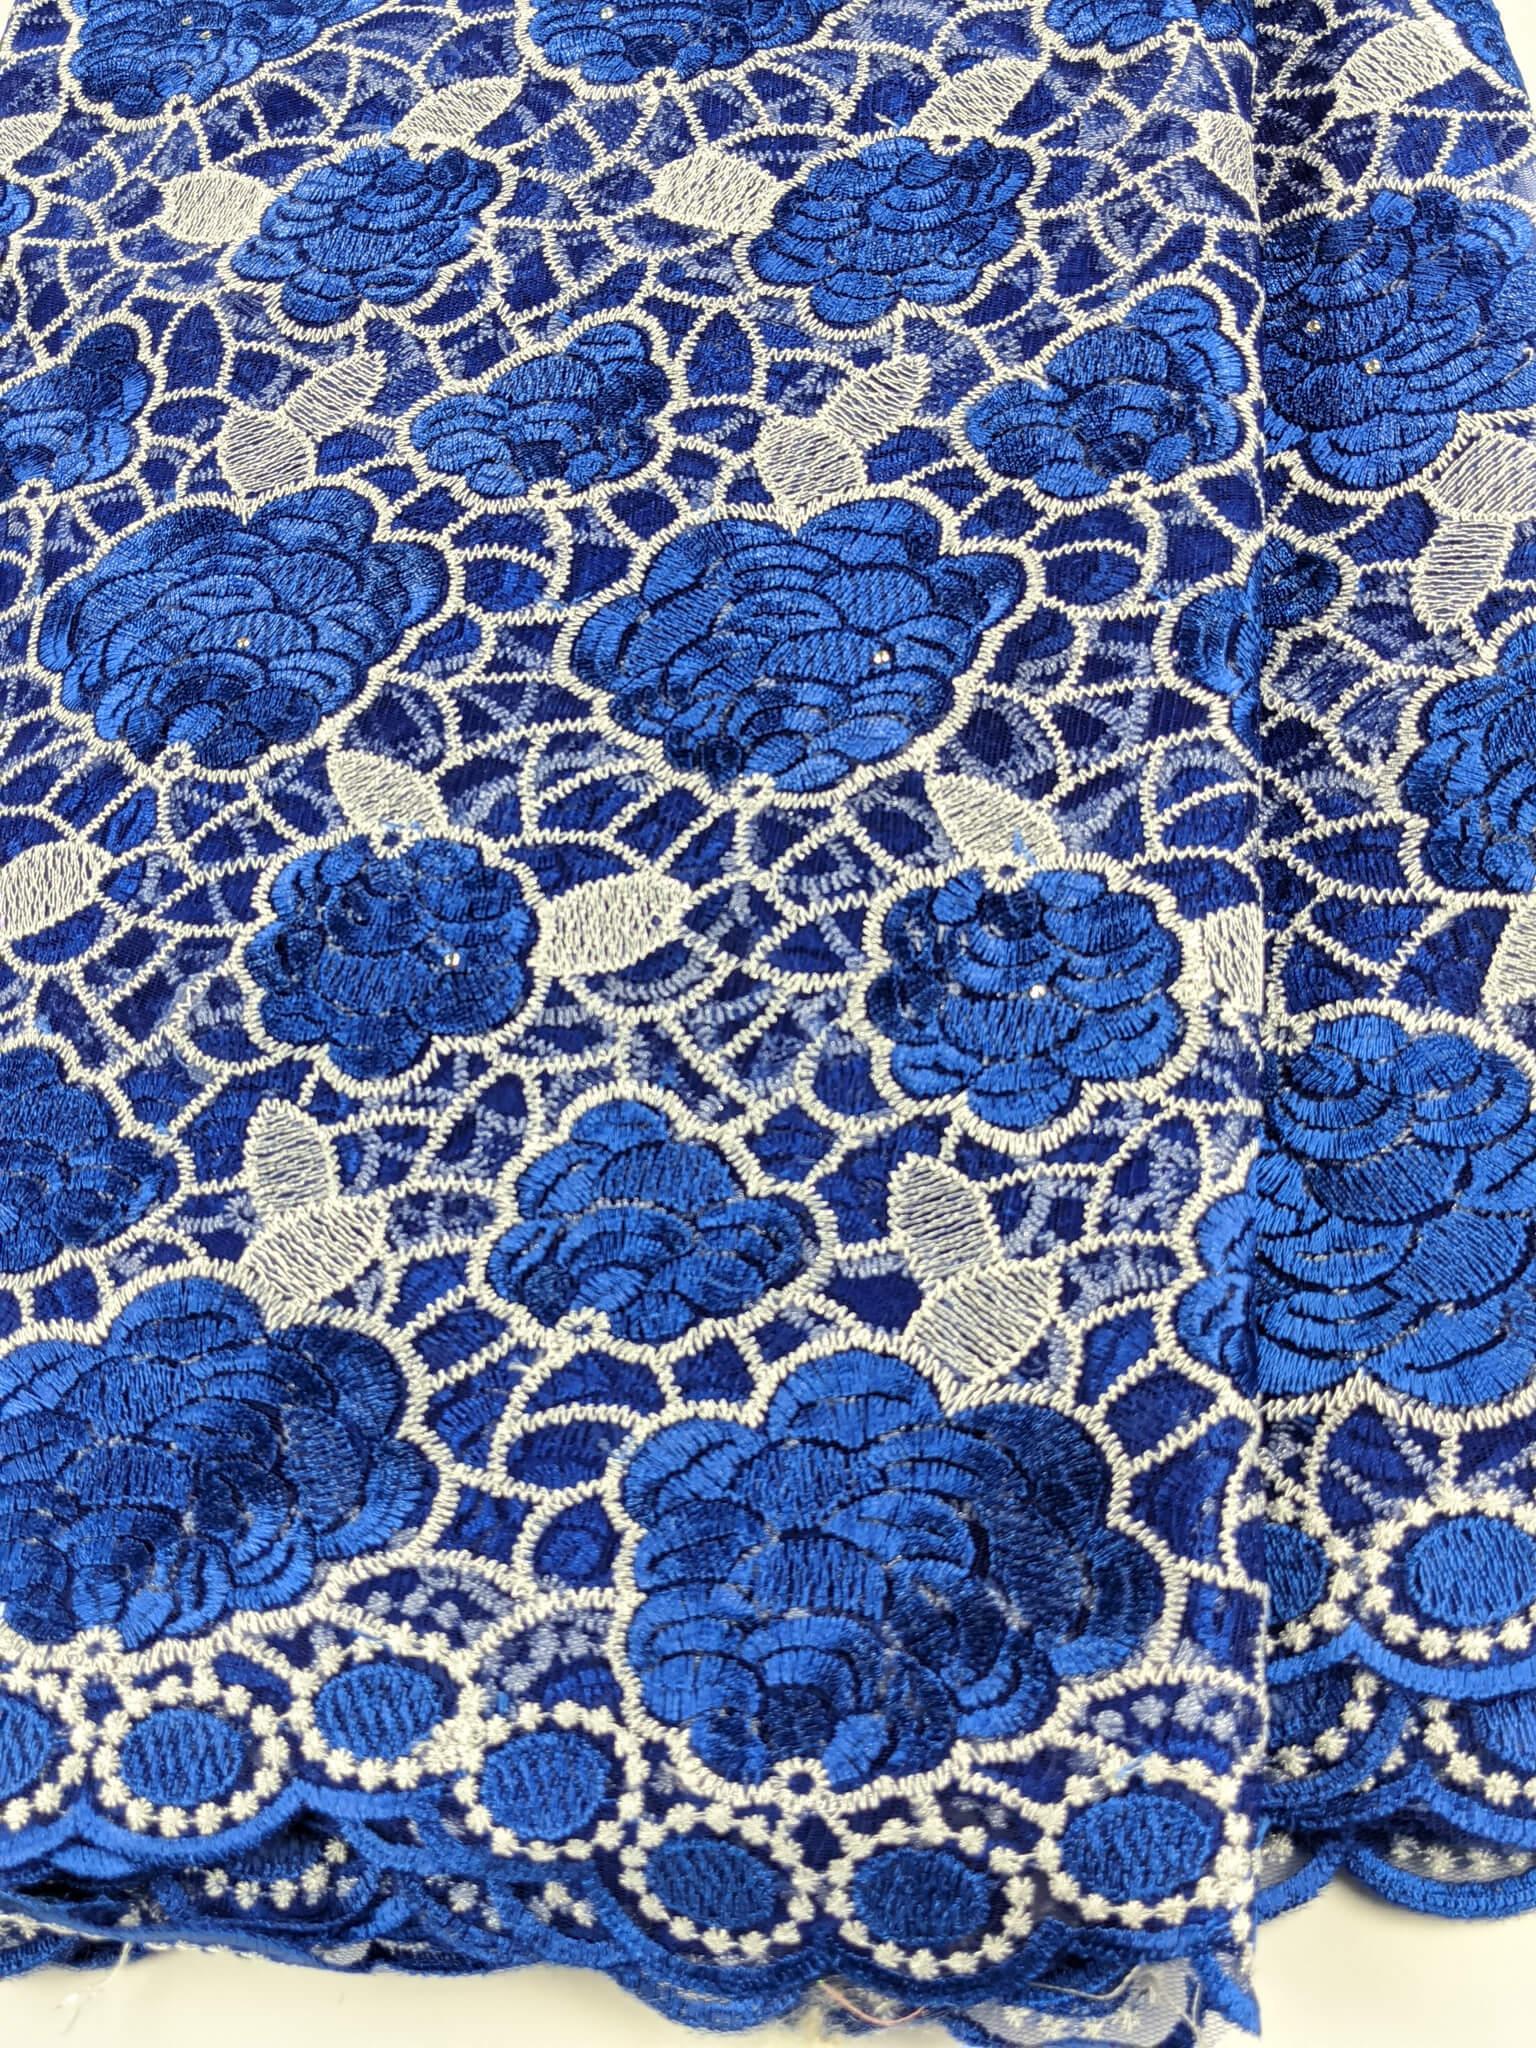 Blue & Silver French Net Lace